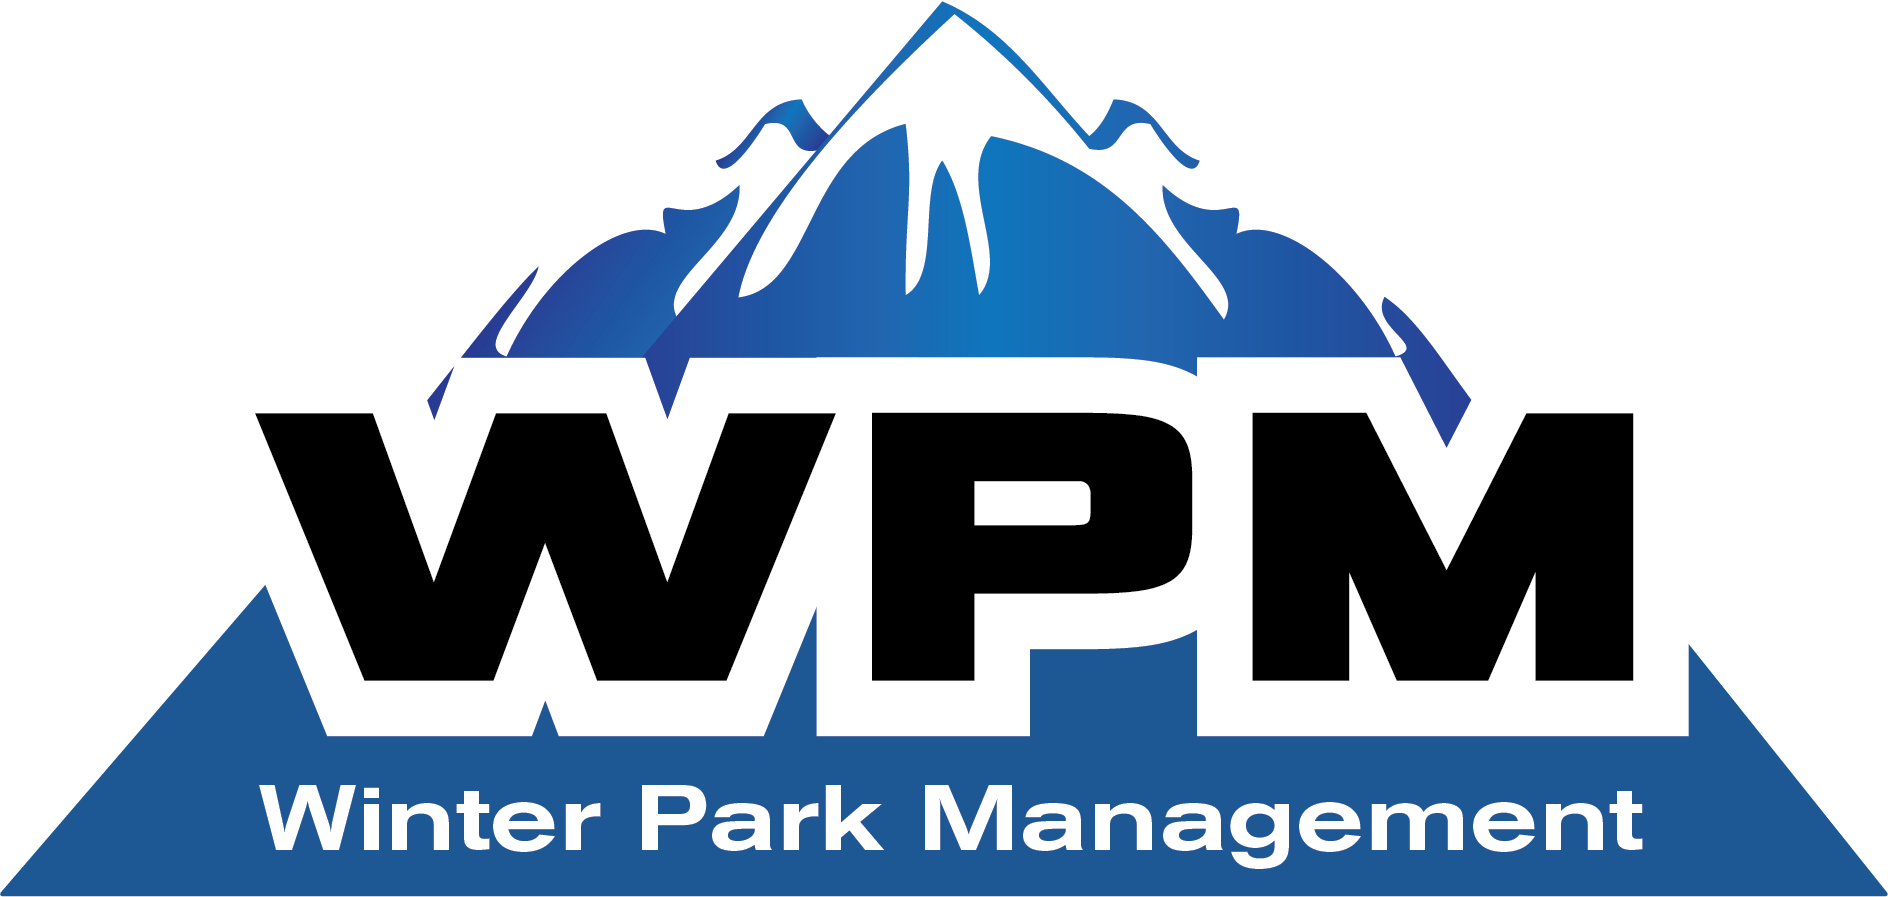 A logo of water park management